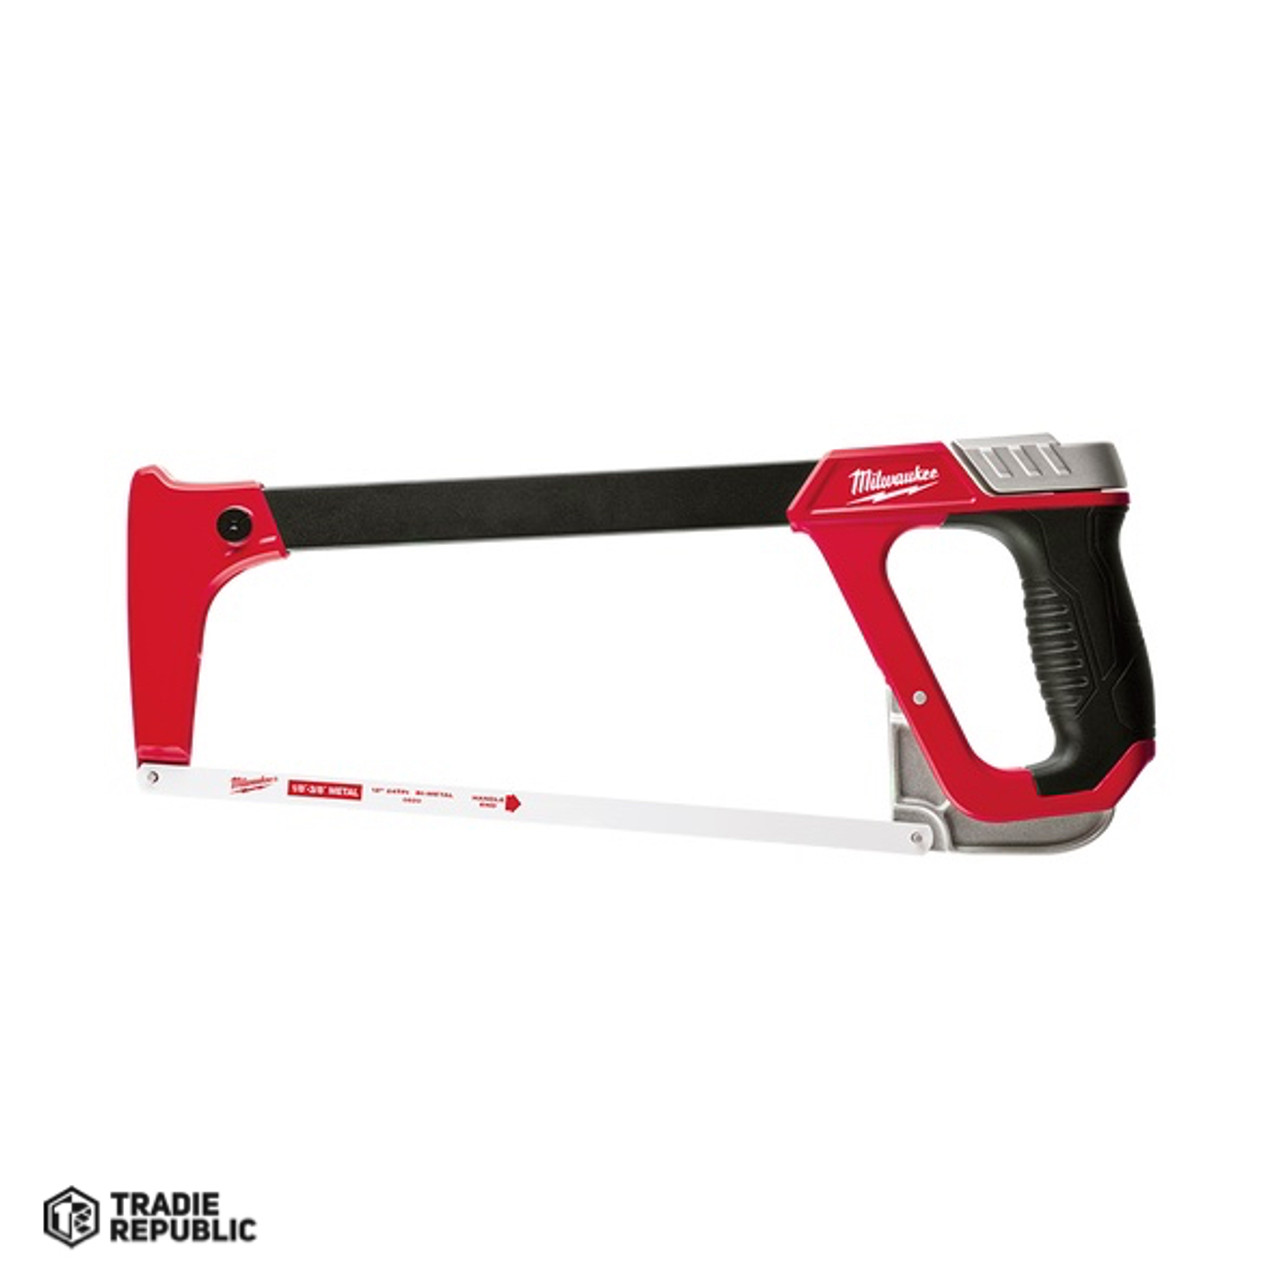 48220050 Milwaukee High Tension Hack Saw 300mm/12in